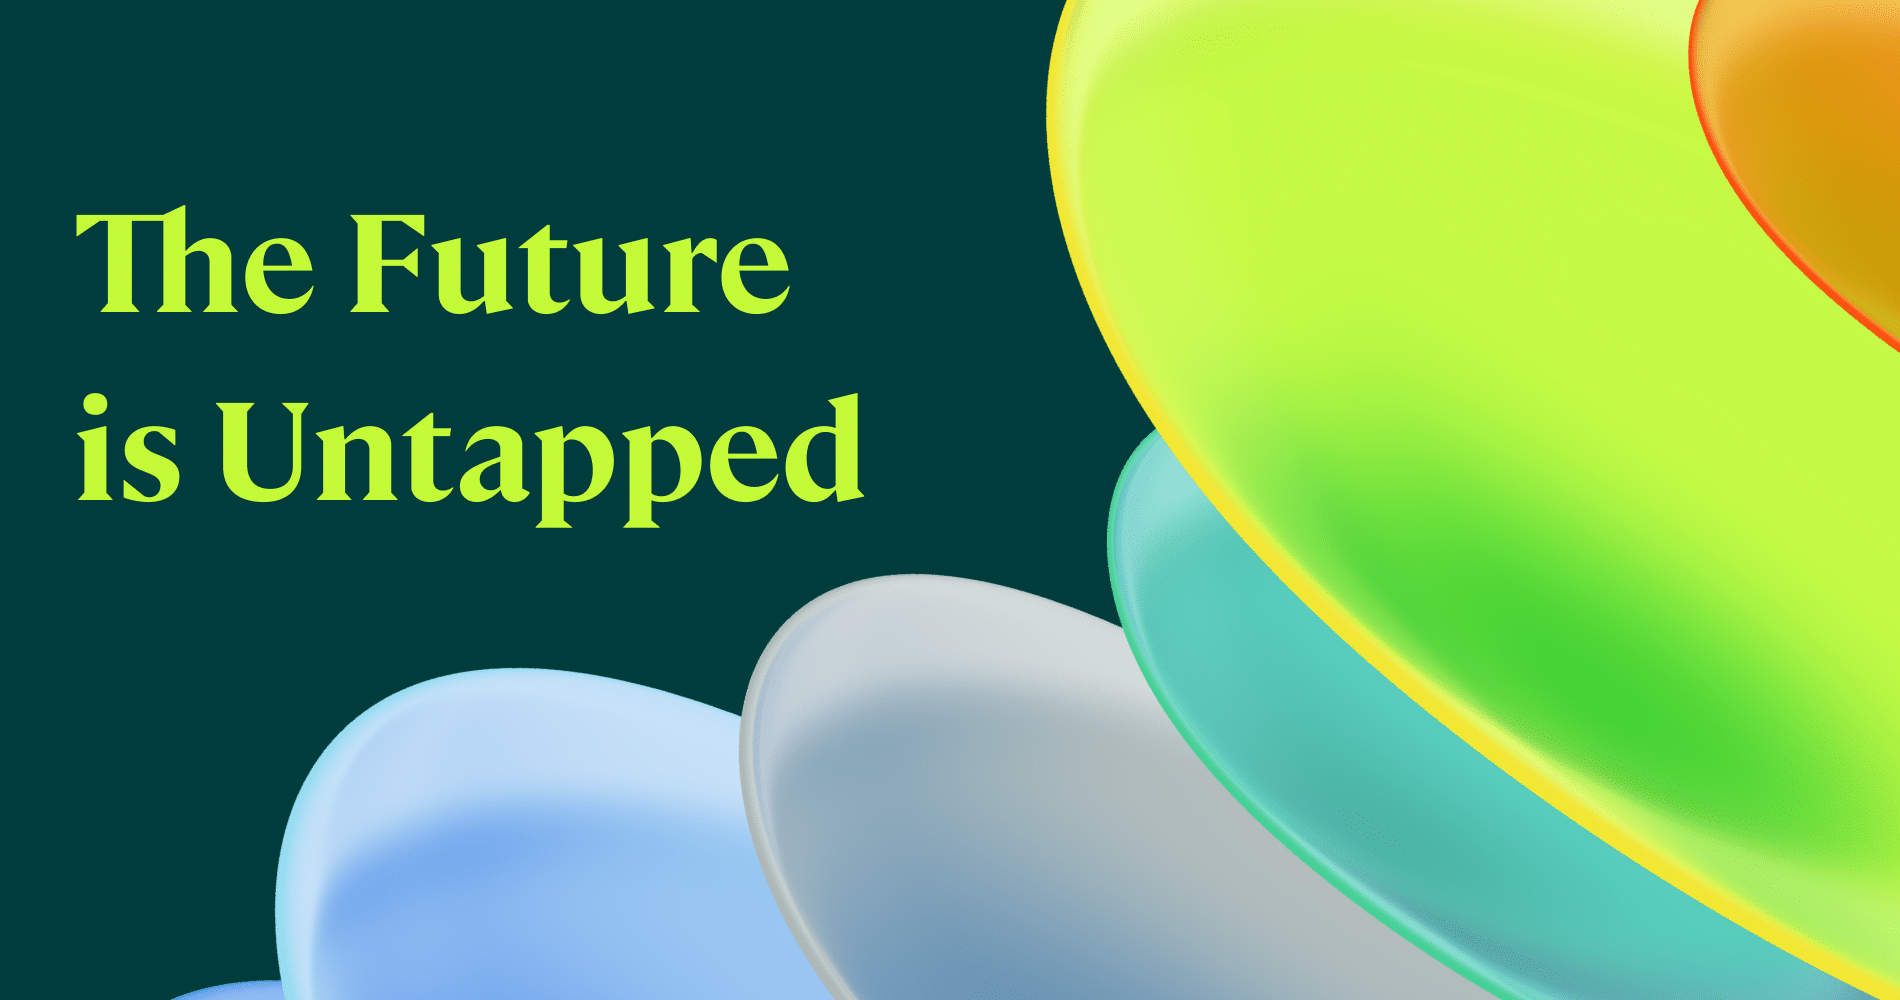 Image that says "The future is untapped" for untapped.io